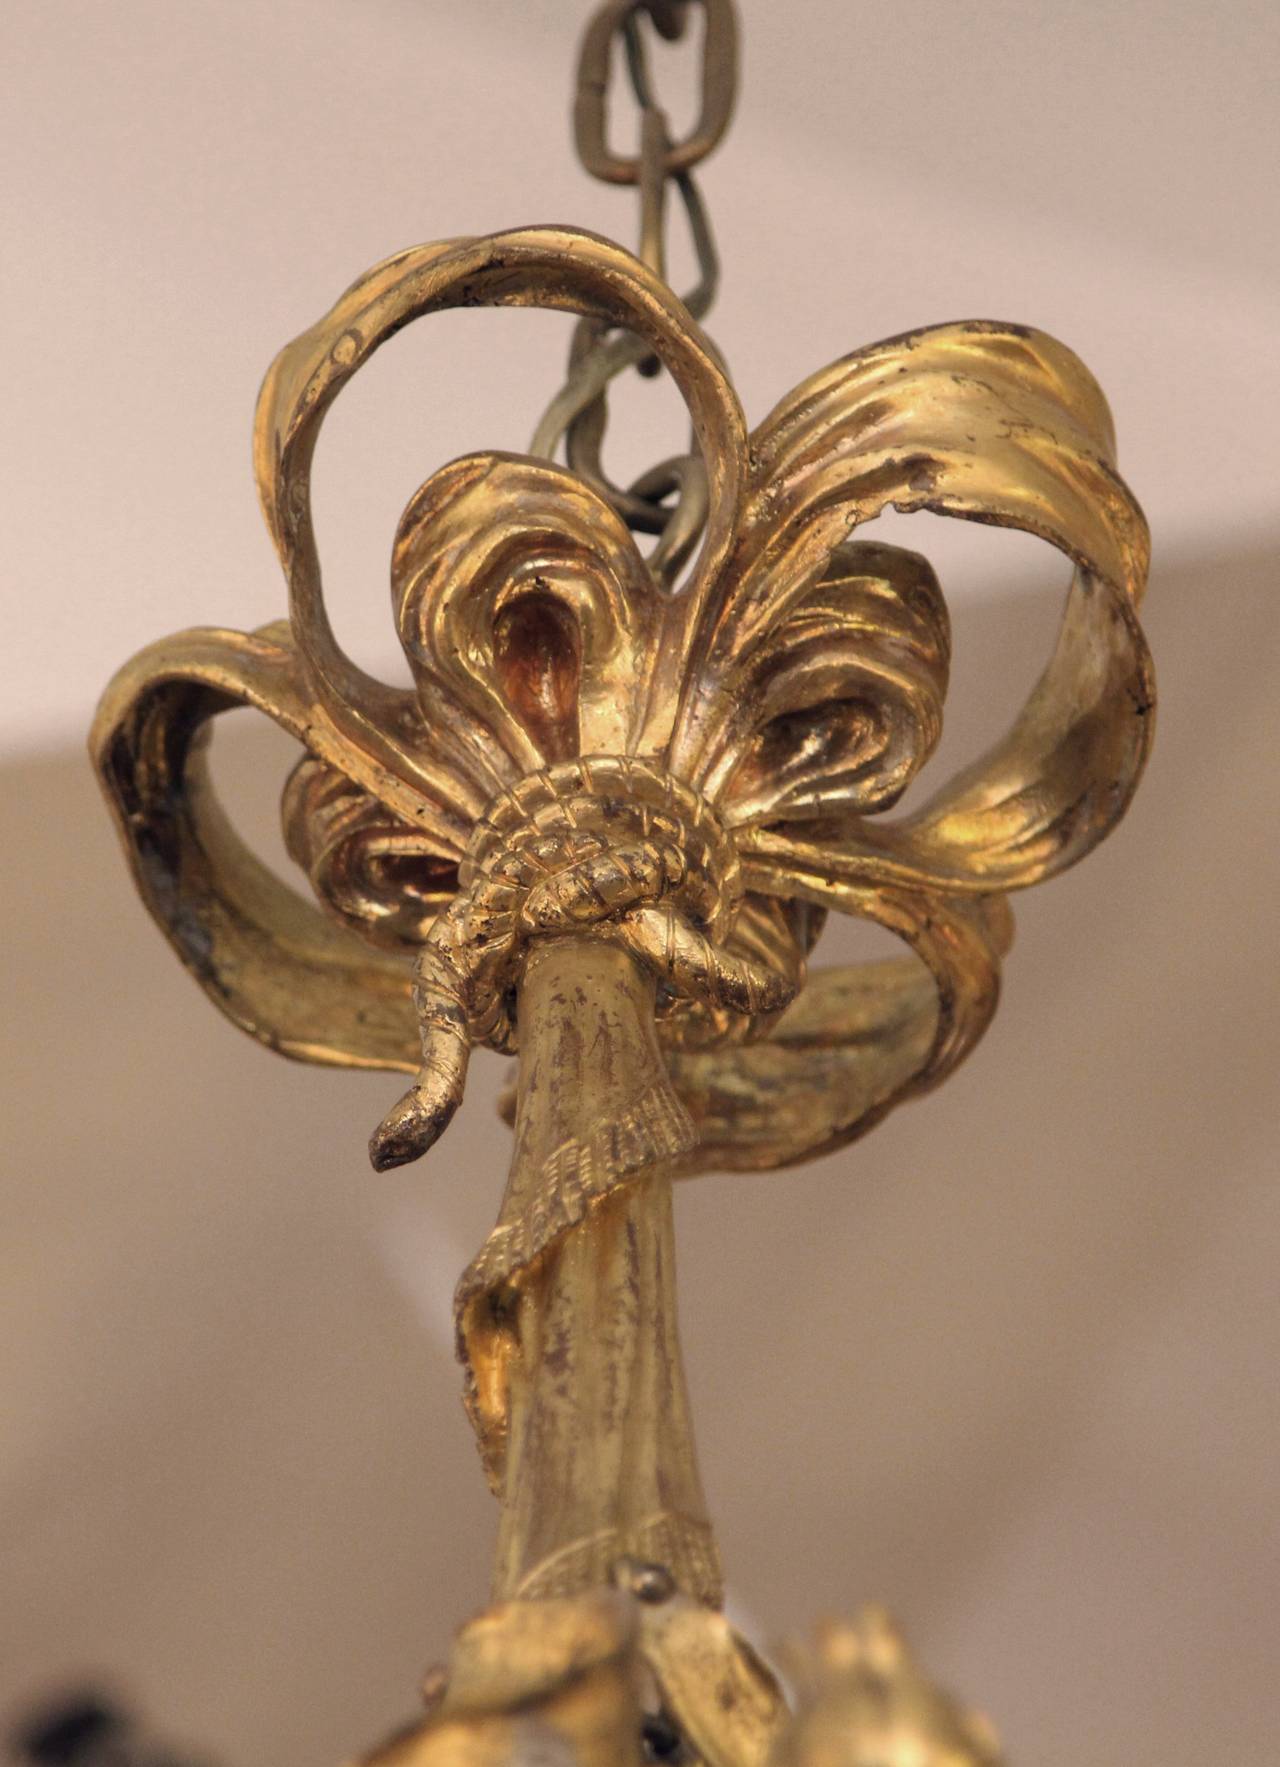 Early 20th Century 1900s French Ormolu Bronze Chandelier with Flowers, Rope, Ribbons and a Serpent